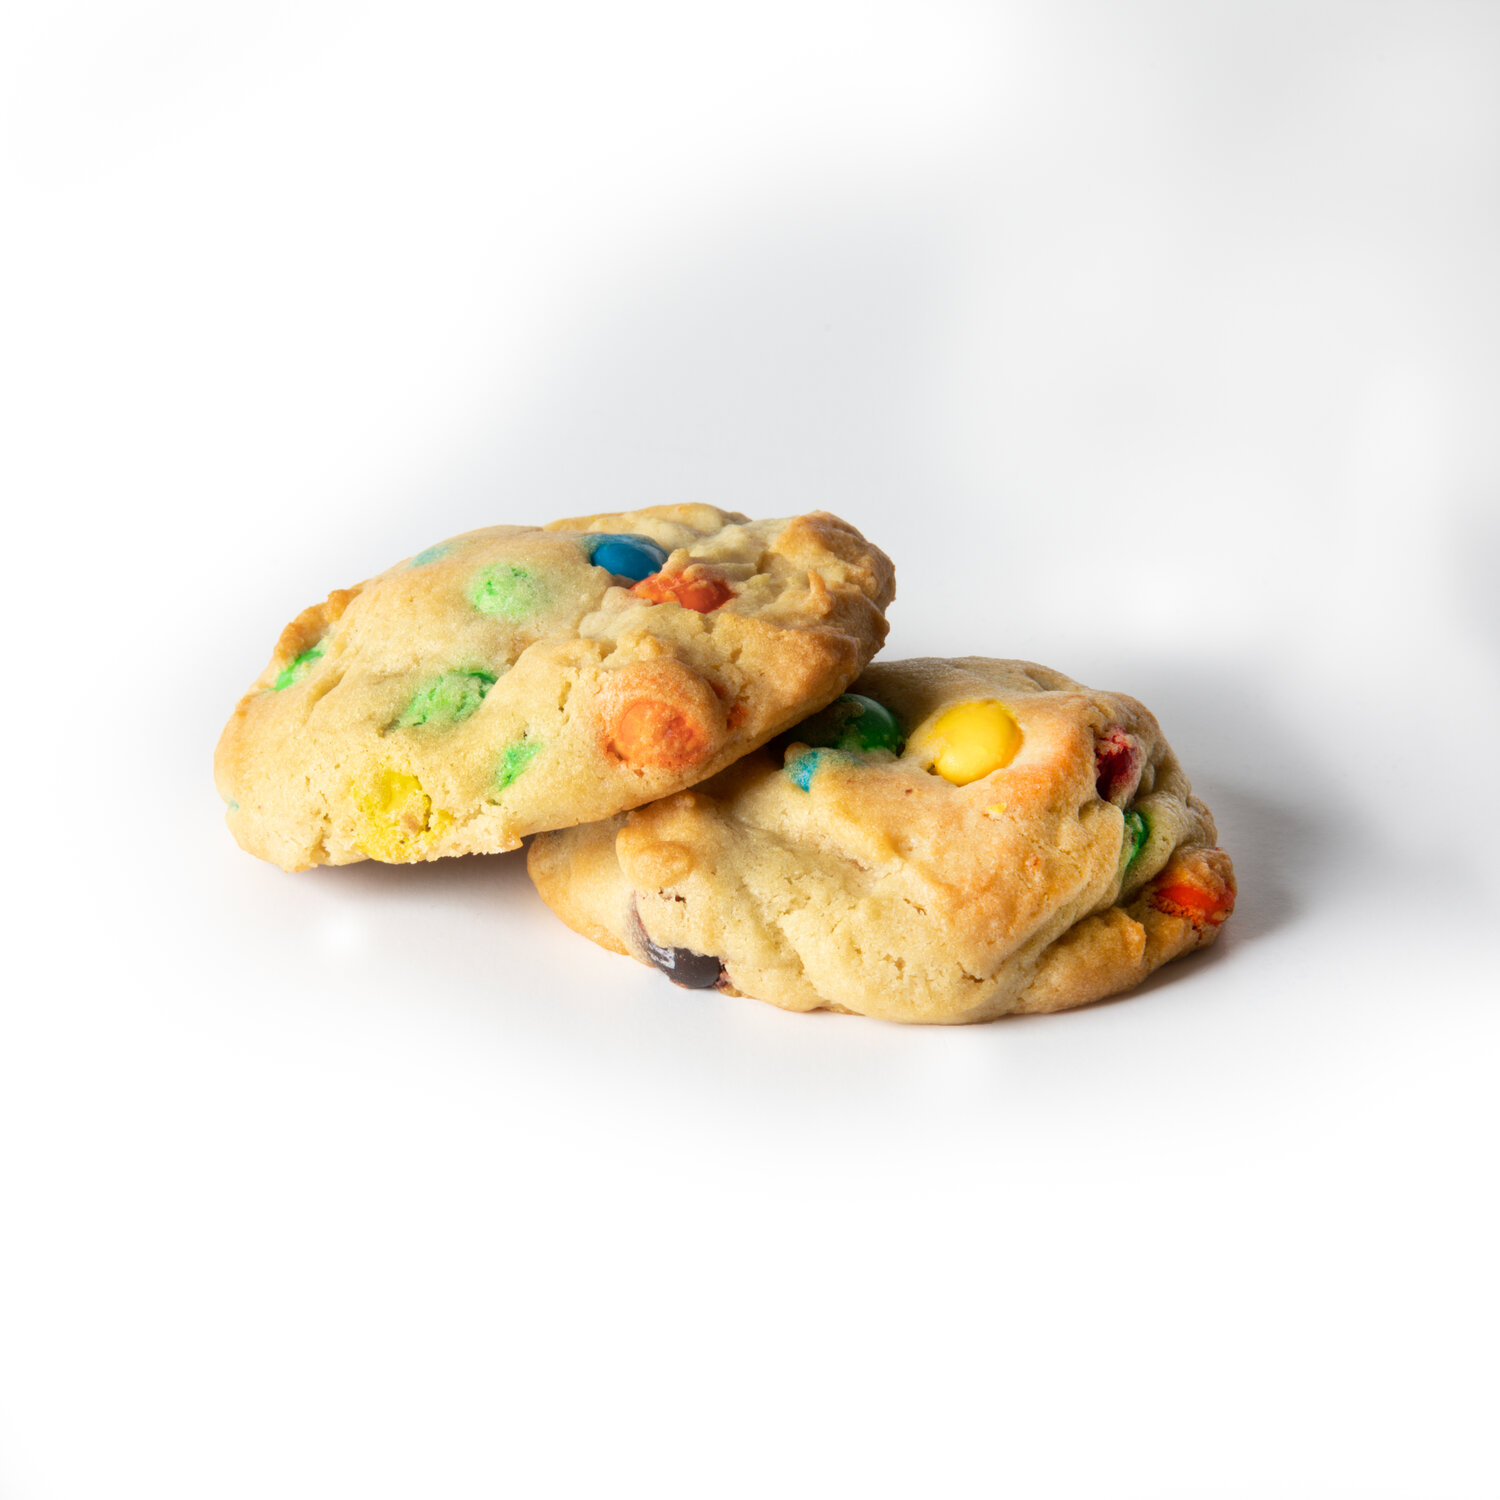 Shop — Welcome to TruLea Cookies!